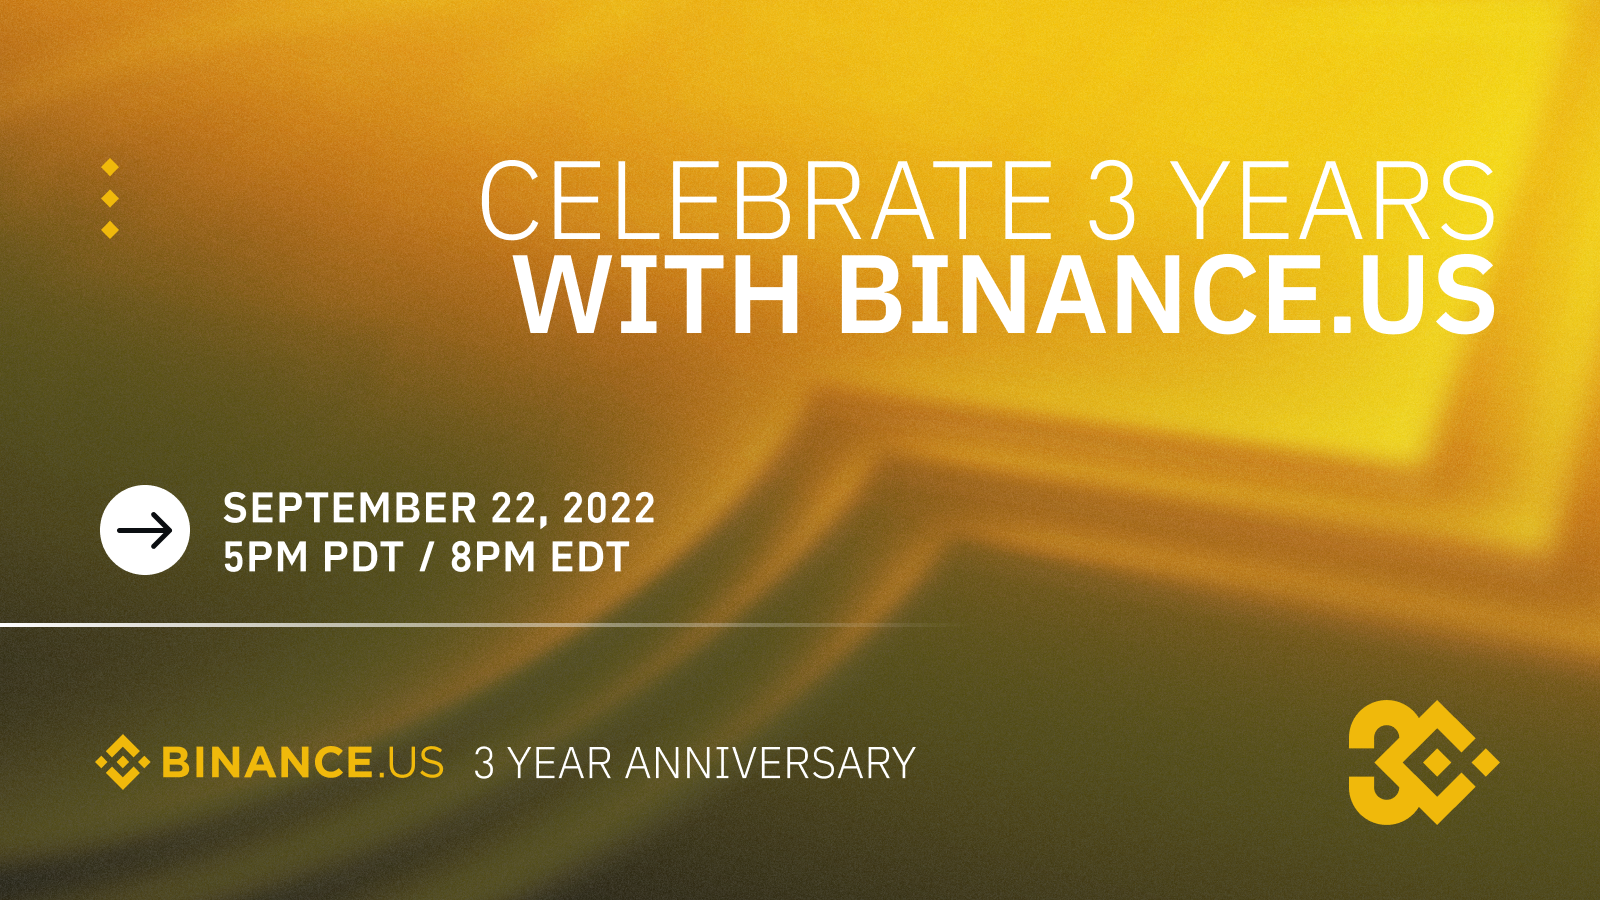 Binance.US Announces 3 Year Anniversary “Meet Us in the Metaverse” Event With NFT Drops & Exclusive Unlockables